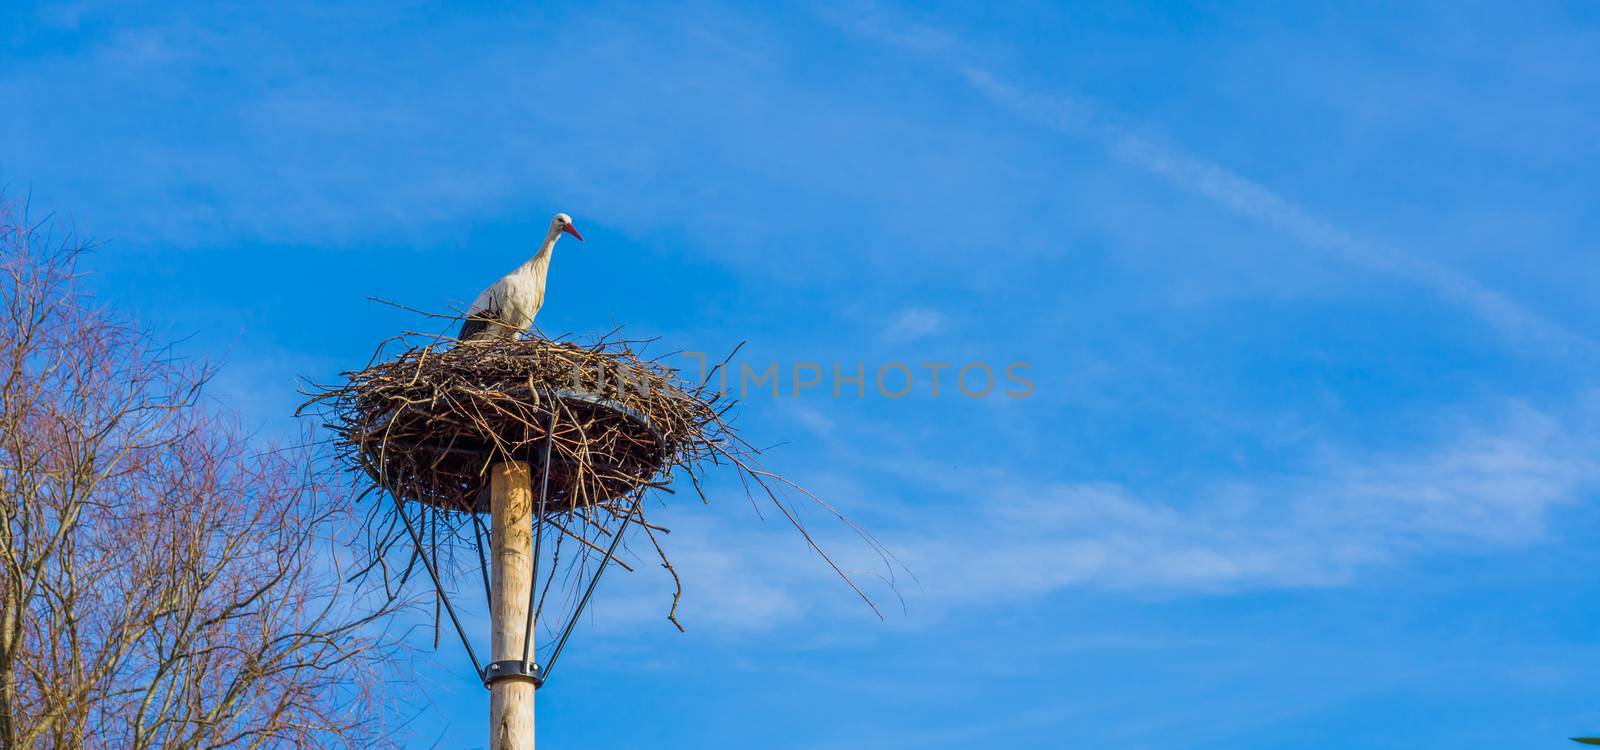 big birds nest with a stork in it, clean and deep blue sky in the background, migrated bird from Africa